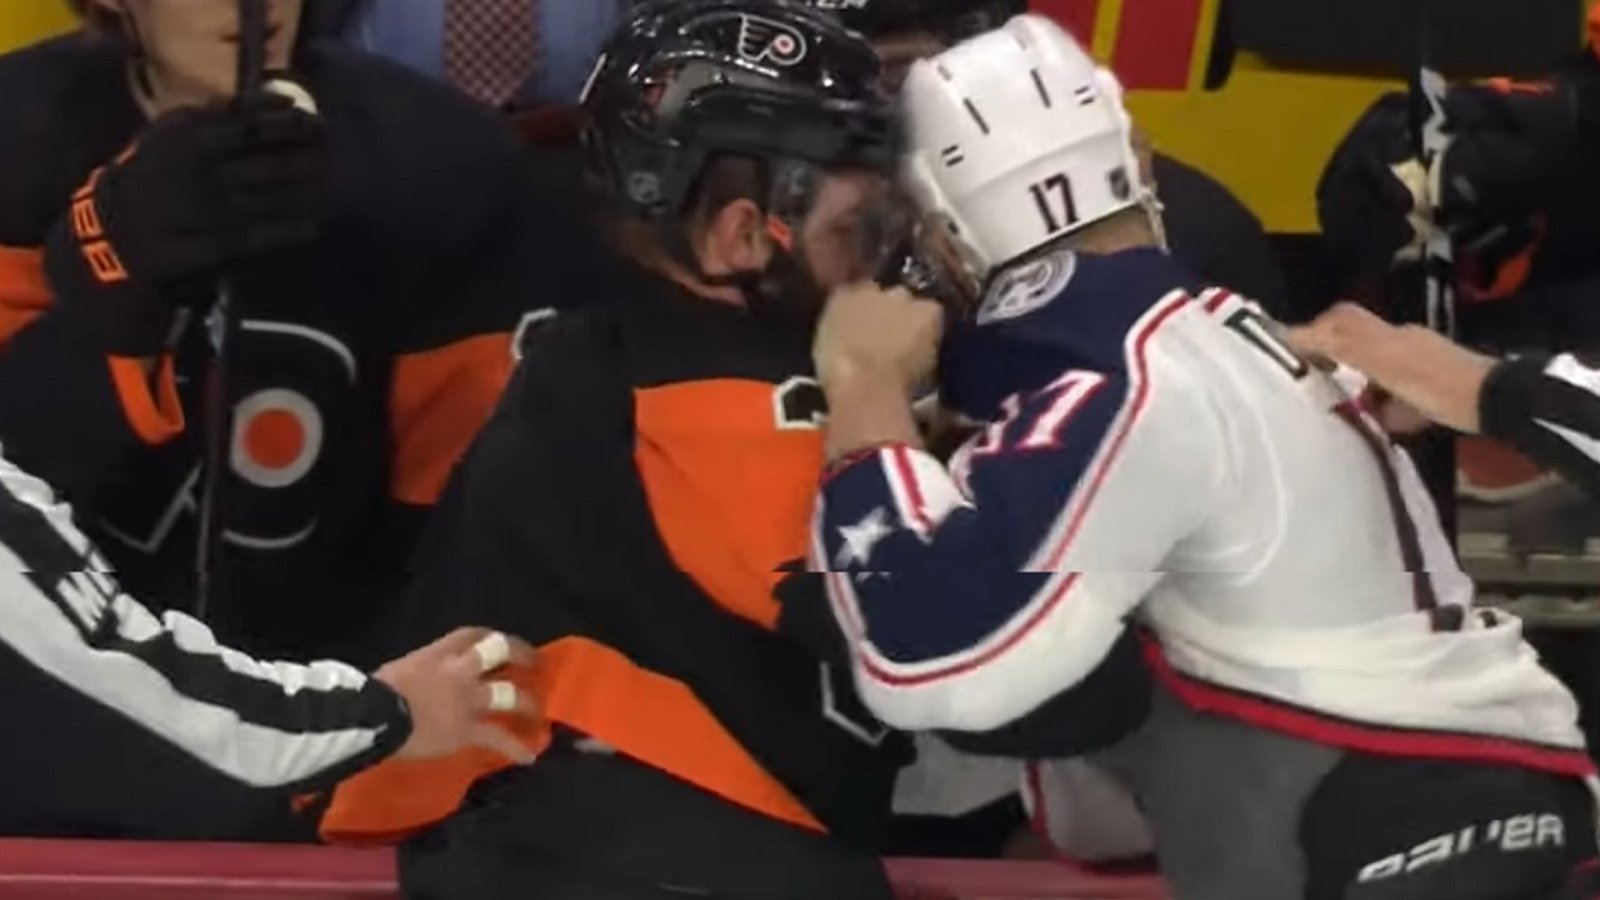 Dubinsky and Gudas square up on Saturday afternoon.